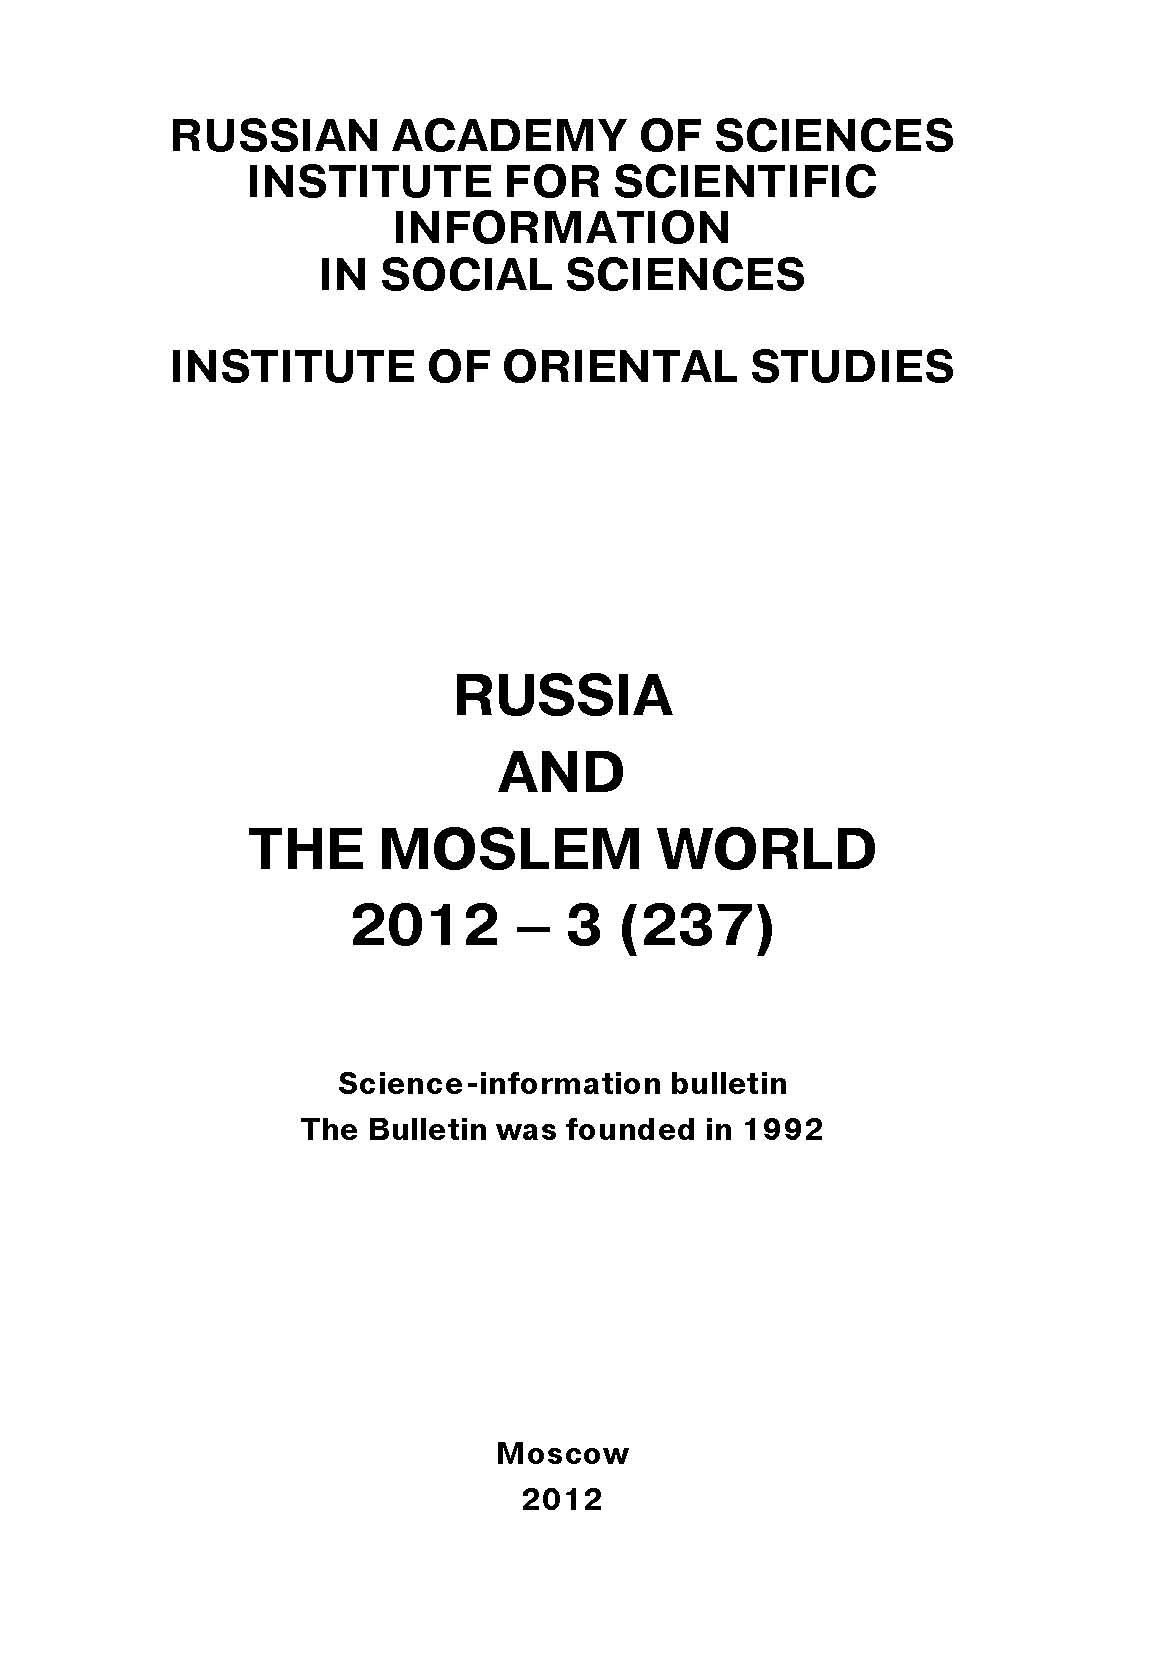 Russia and the Moslem World№ 03 / 2012